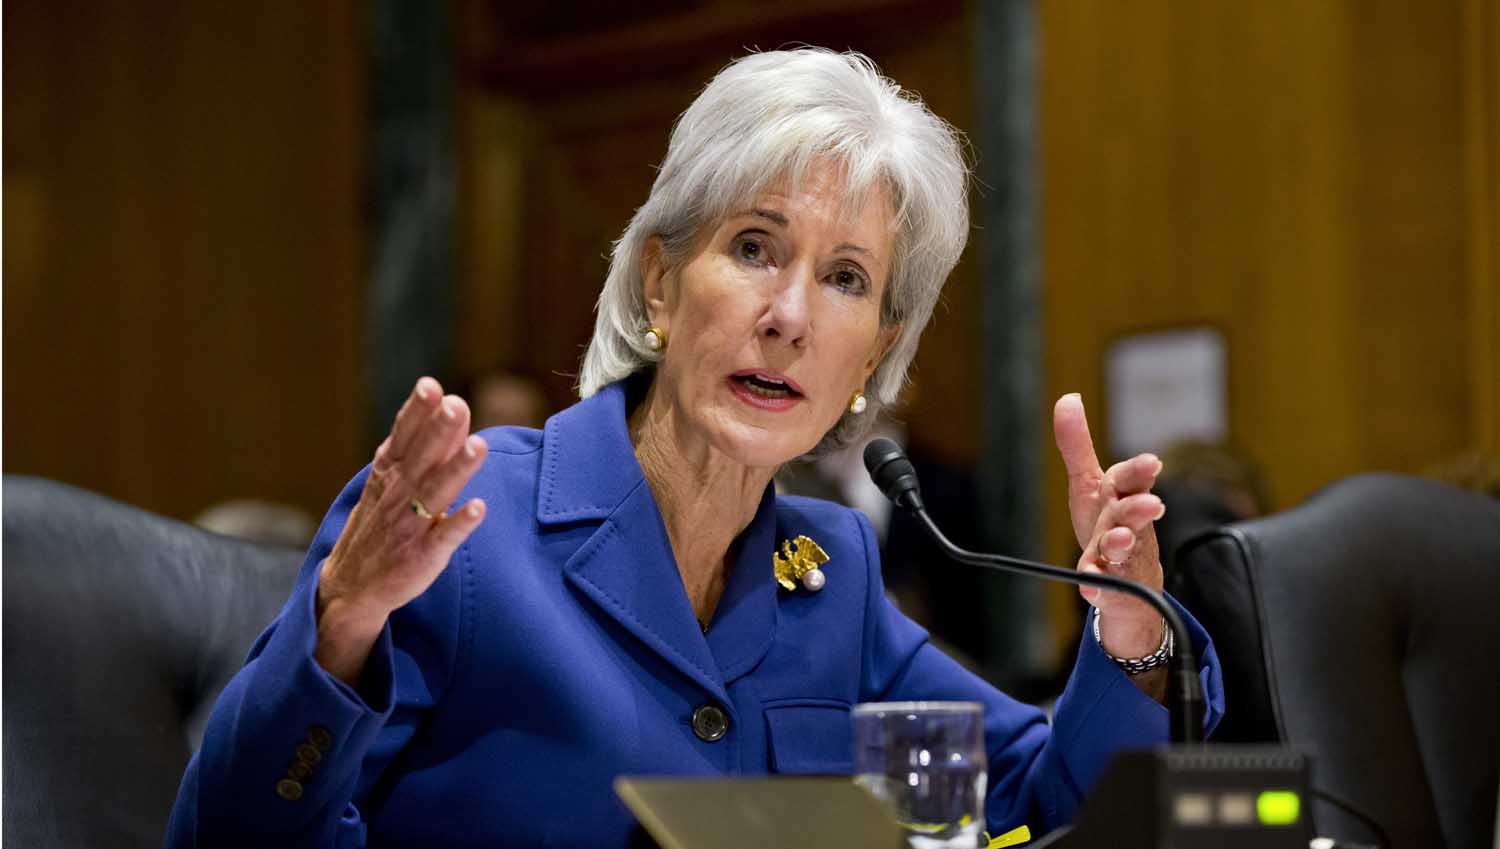 With 8 Million and Counting ACA Sign-Ups, Sebelius Could Run for Senate